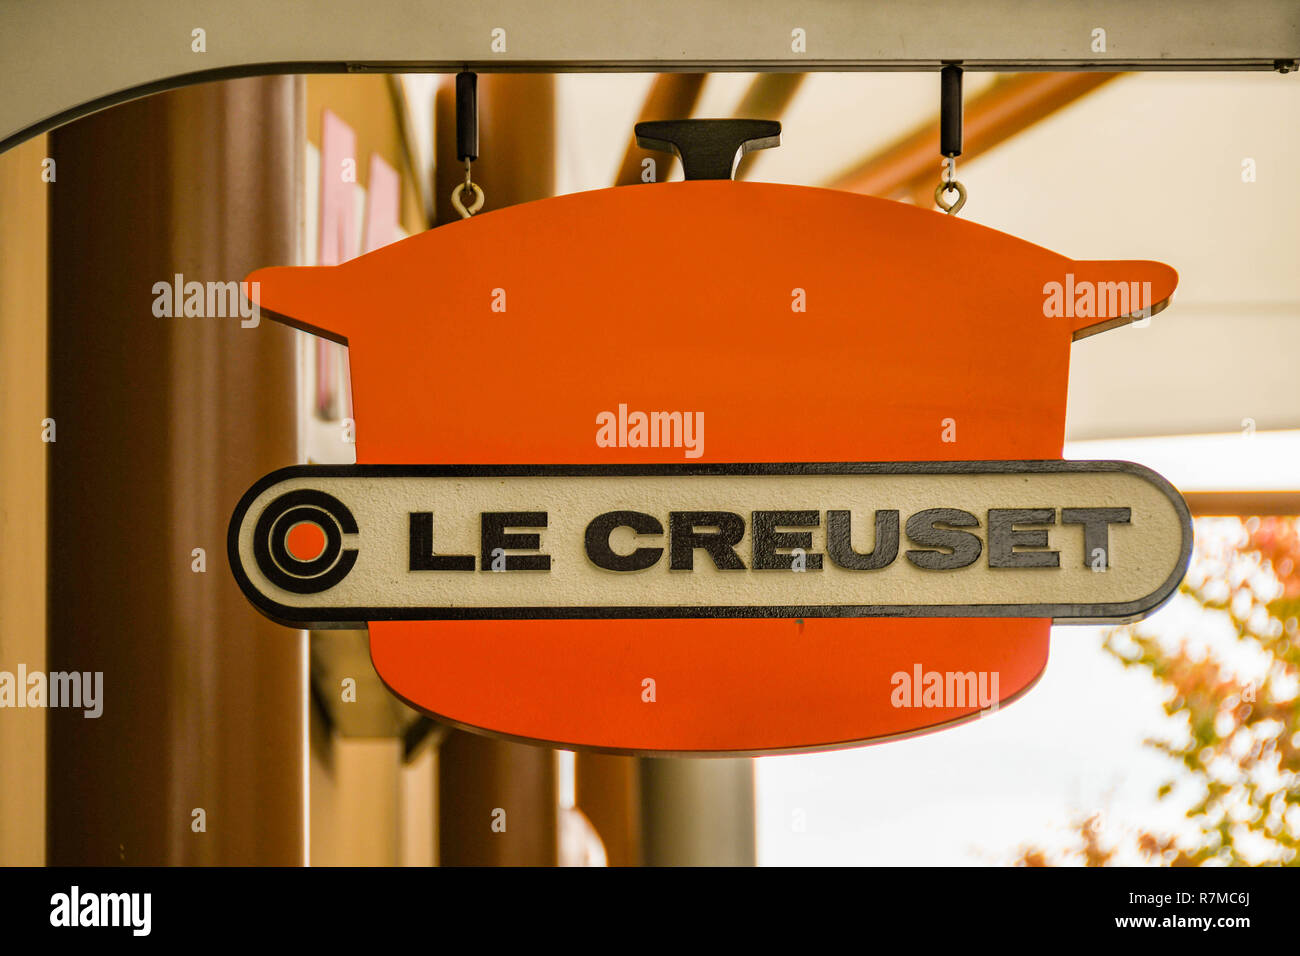 Le creuset hires stock photography and images Alamy